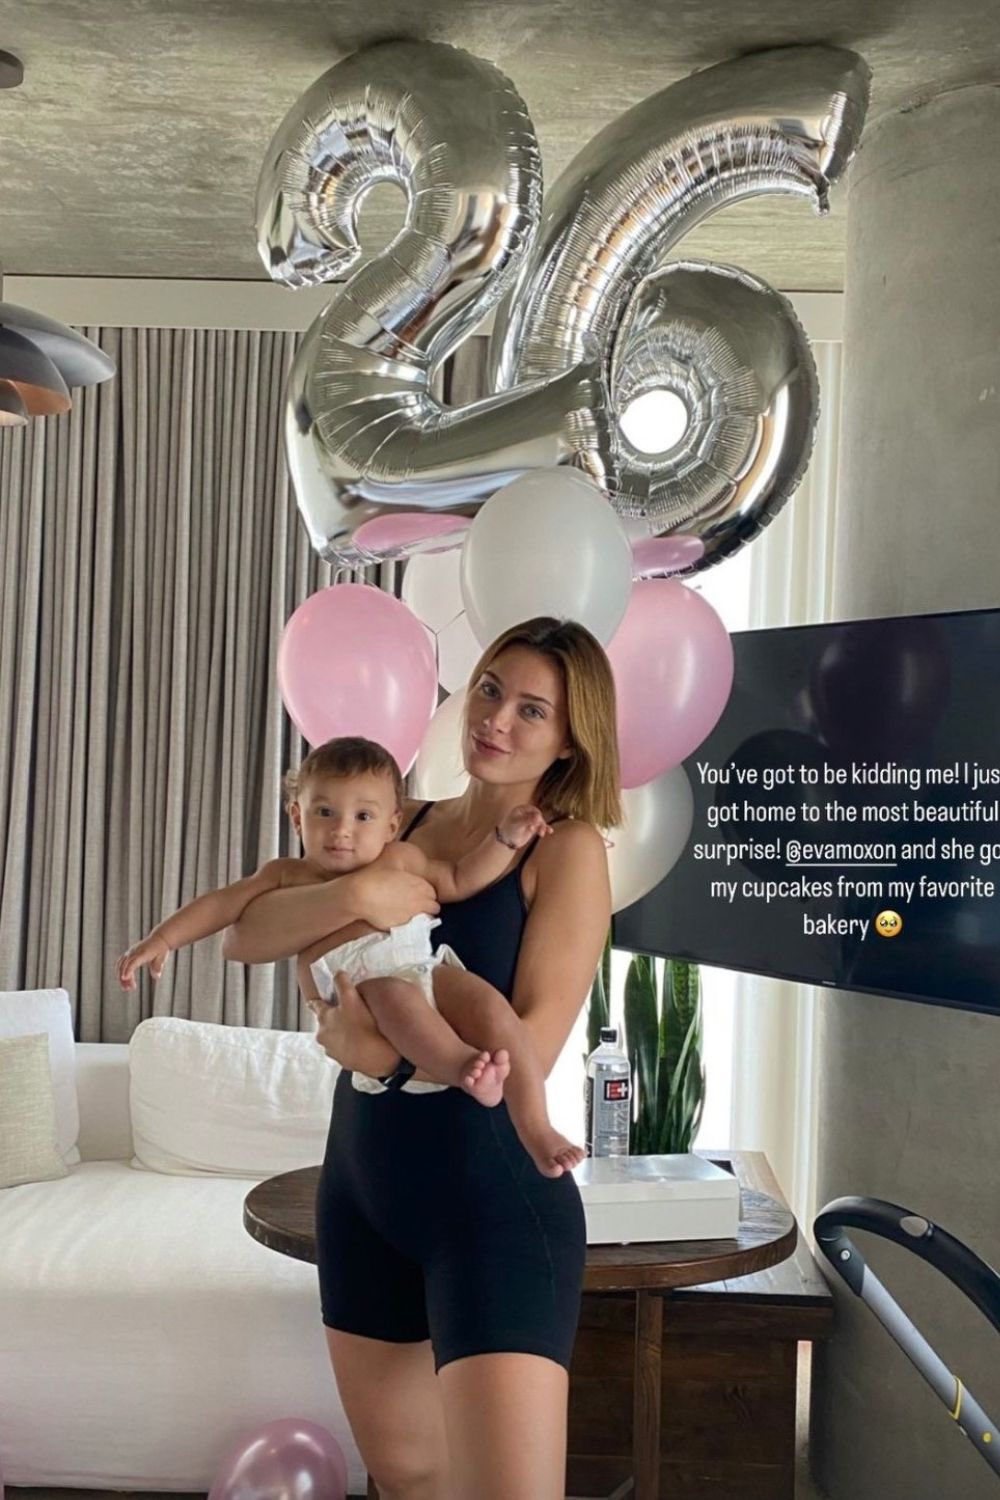 Stat Muse a X: "It's clear as day who Lana Rhoades baby daddy is, we thought it was KD or Blake https://t.co/NAJV1Cb1bf" / X